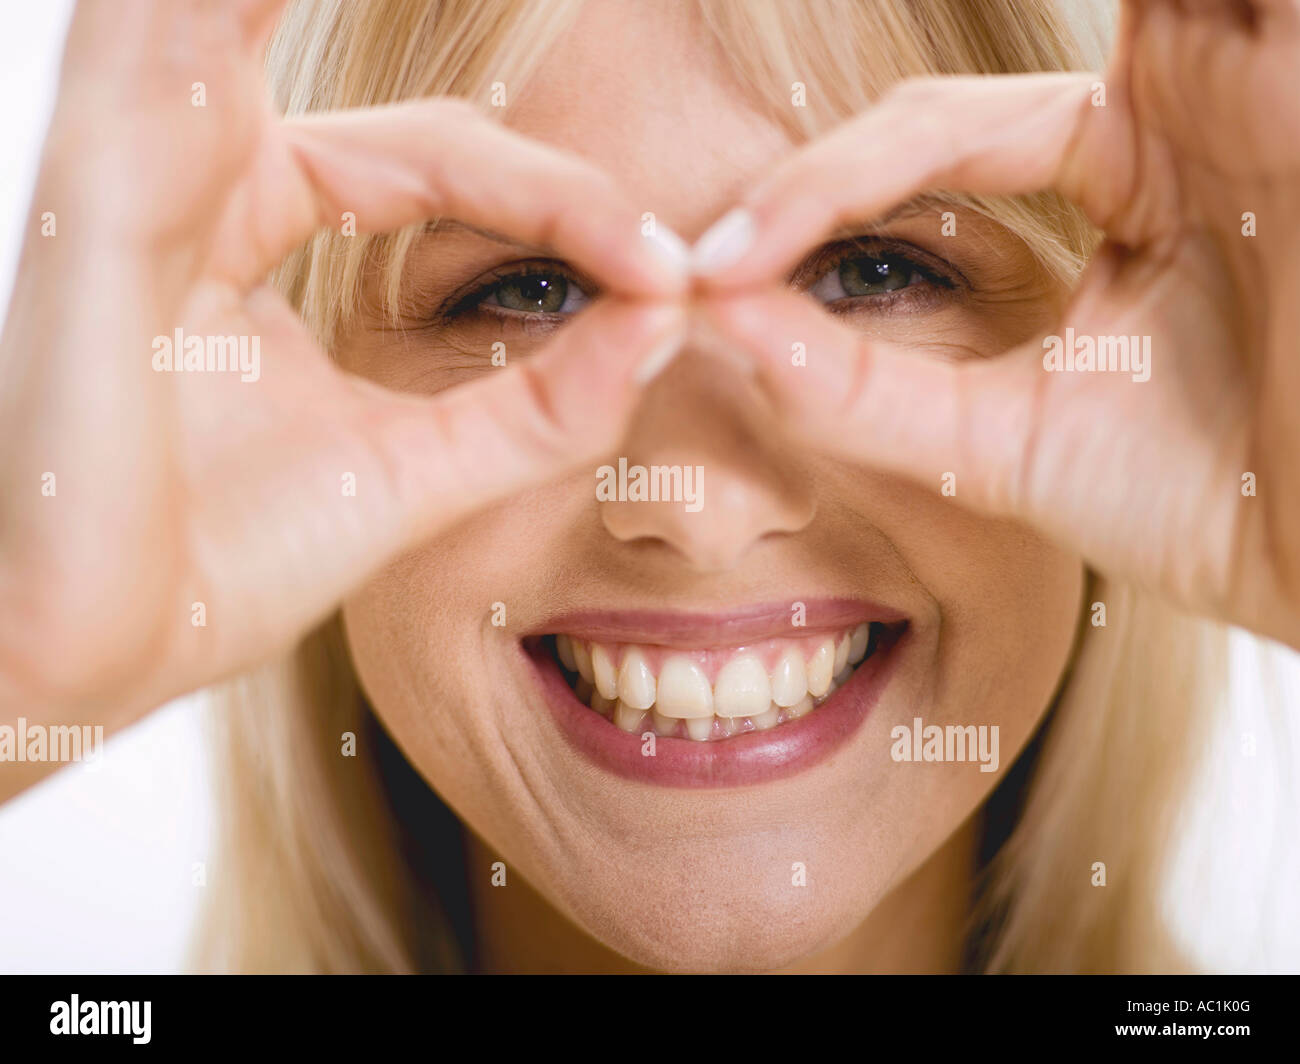 Woman looking through fingers, smiling Stock Photo